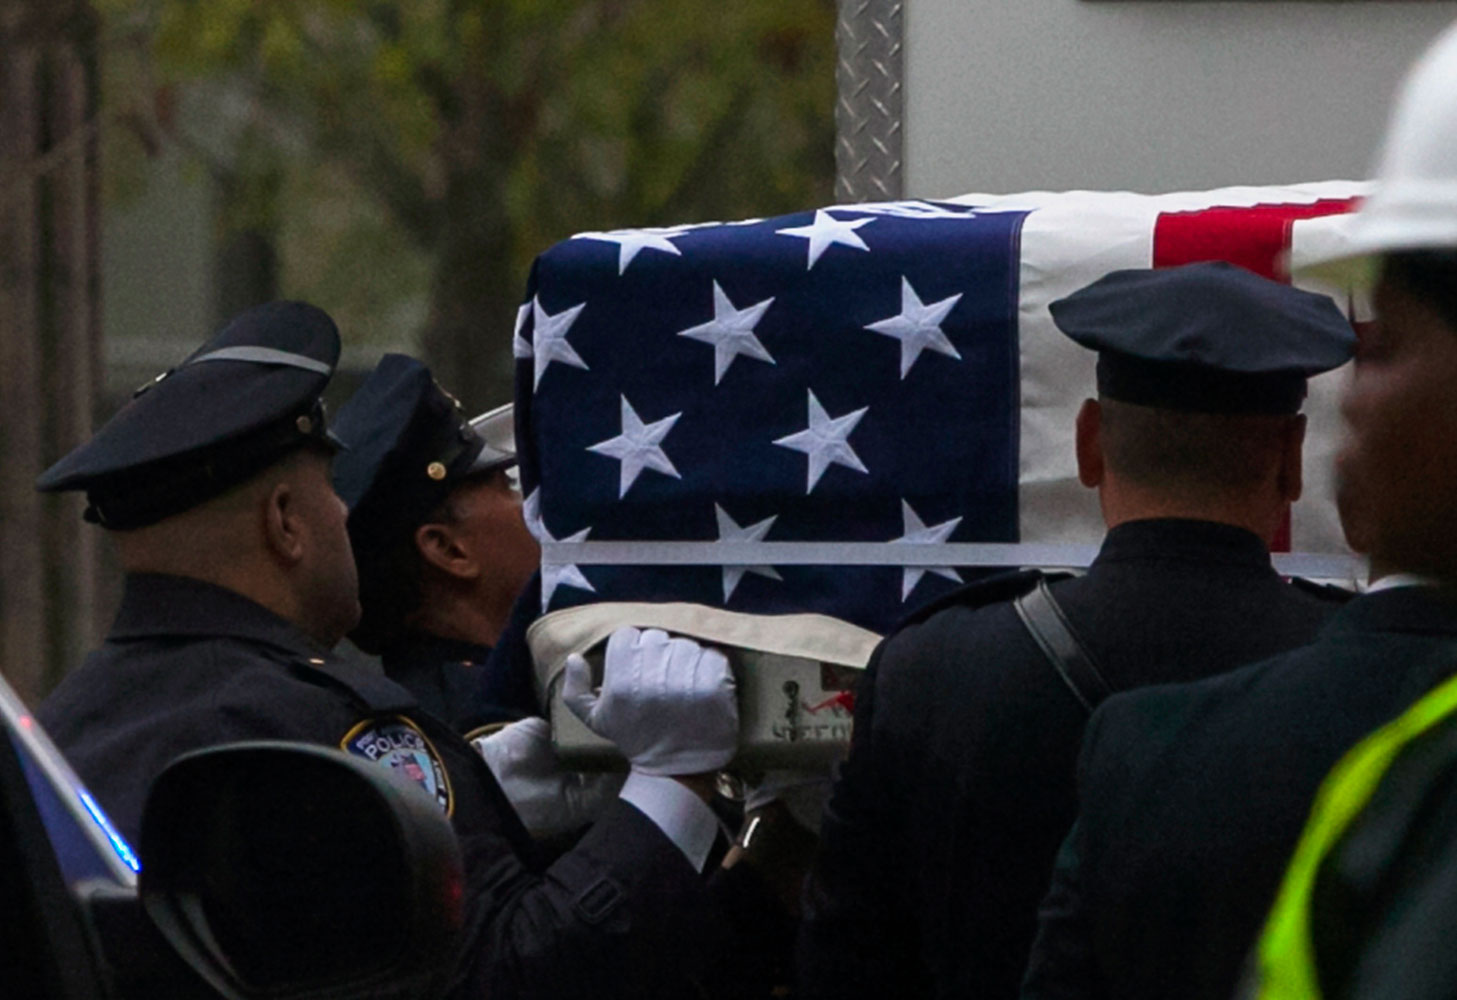 Emergency personnel carry a casket draped with a U.S. flag during the ceremonial transfer of the 9/11 unidentified remains to the Office of the Chief Medical Examiner of the City of New York (OCME) repository at the World Trade Center site, in New York May 10, 2014. (Eric Thayer—Reuters)